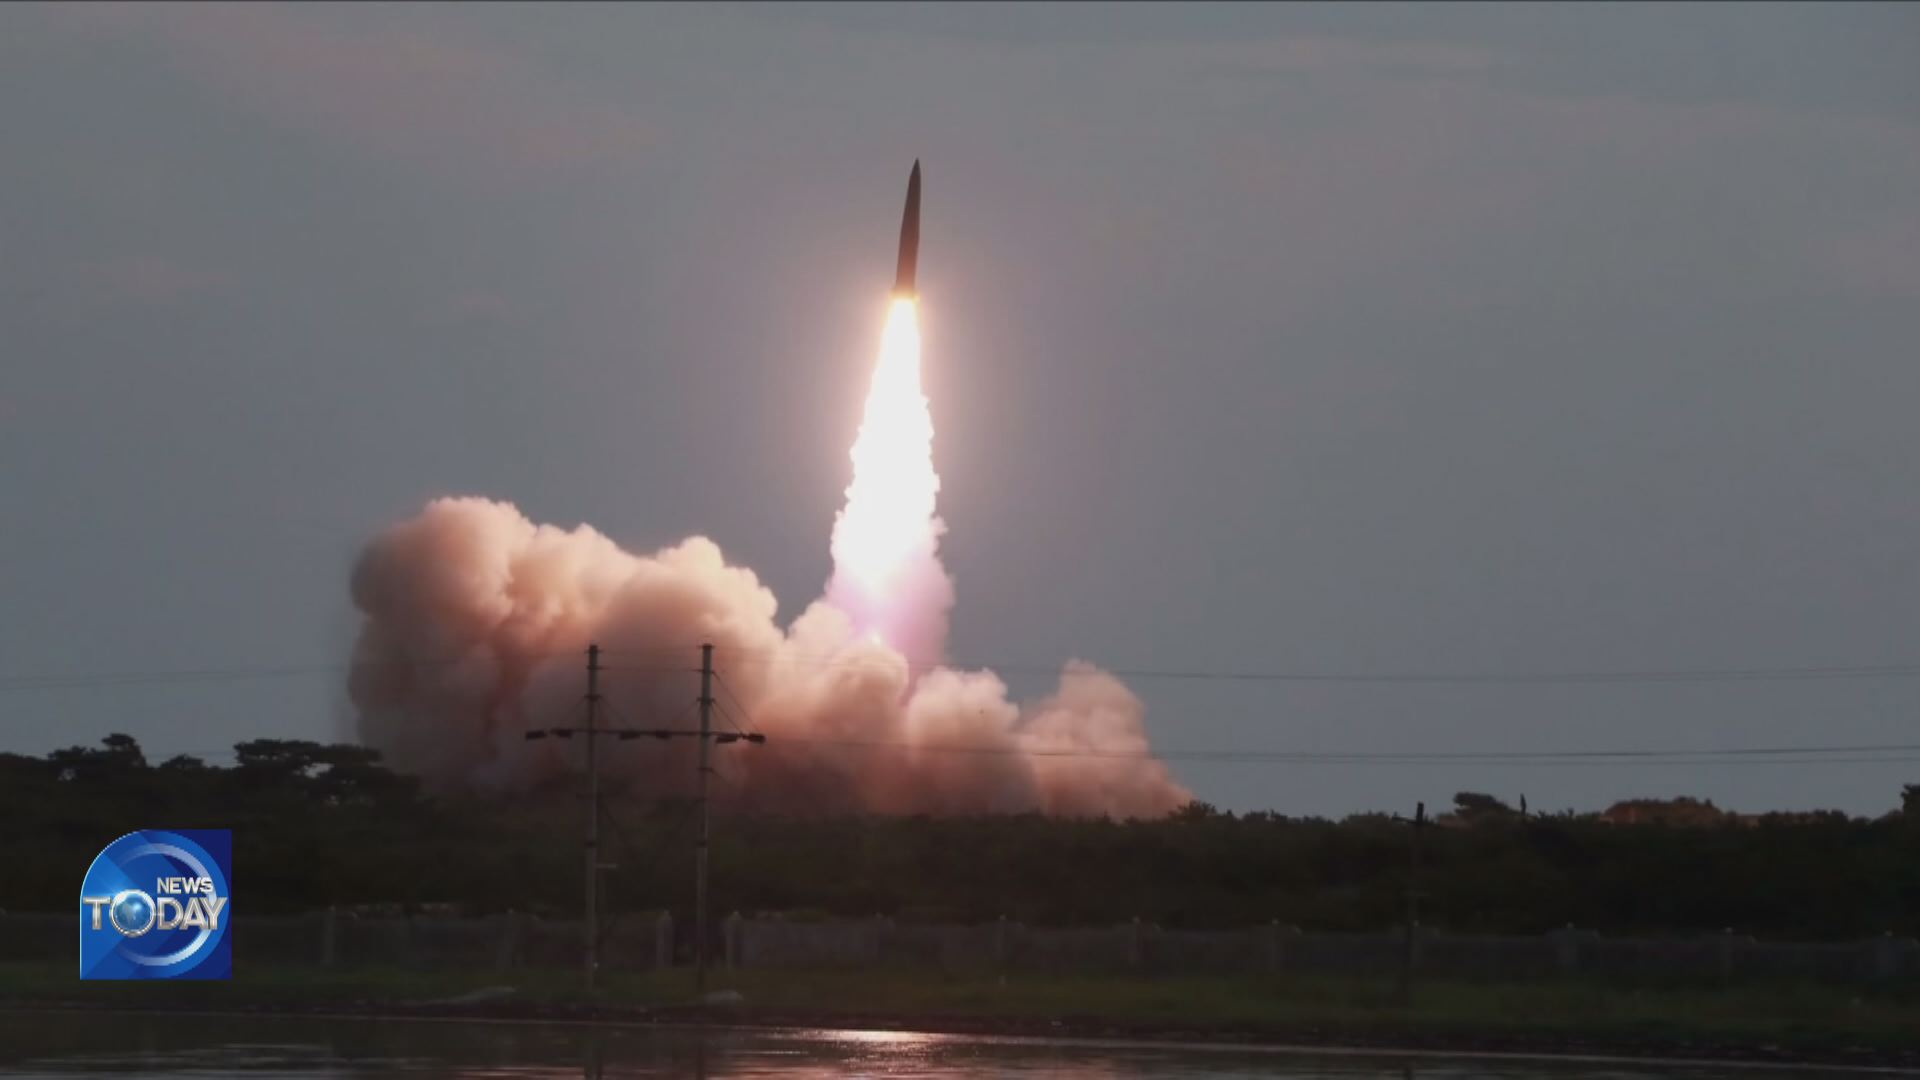 N.KOREA’S 3RD MISSILE LAUNCH IN 5 DAYS